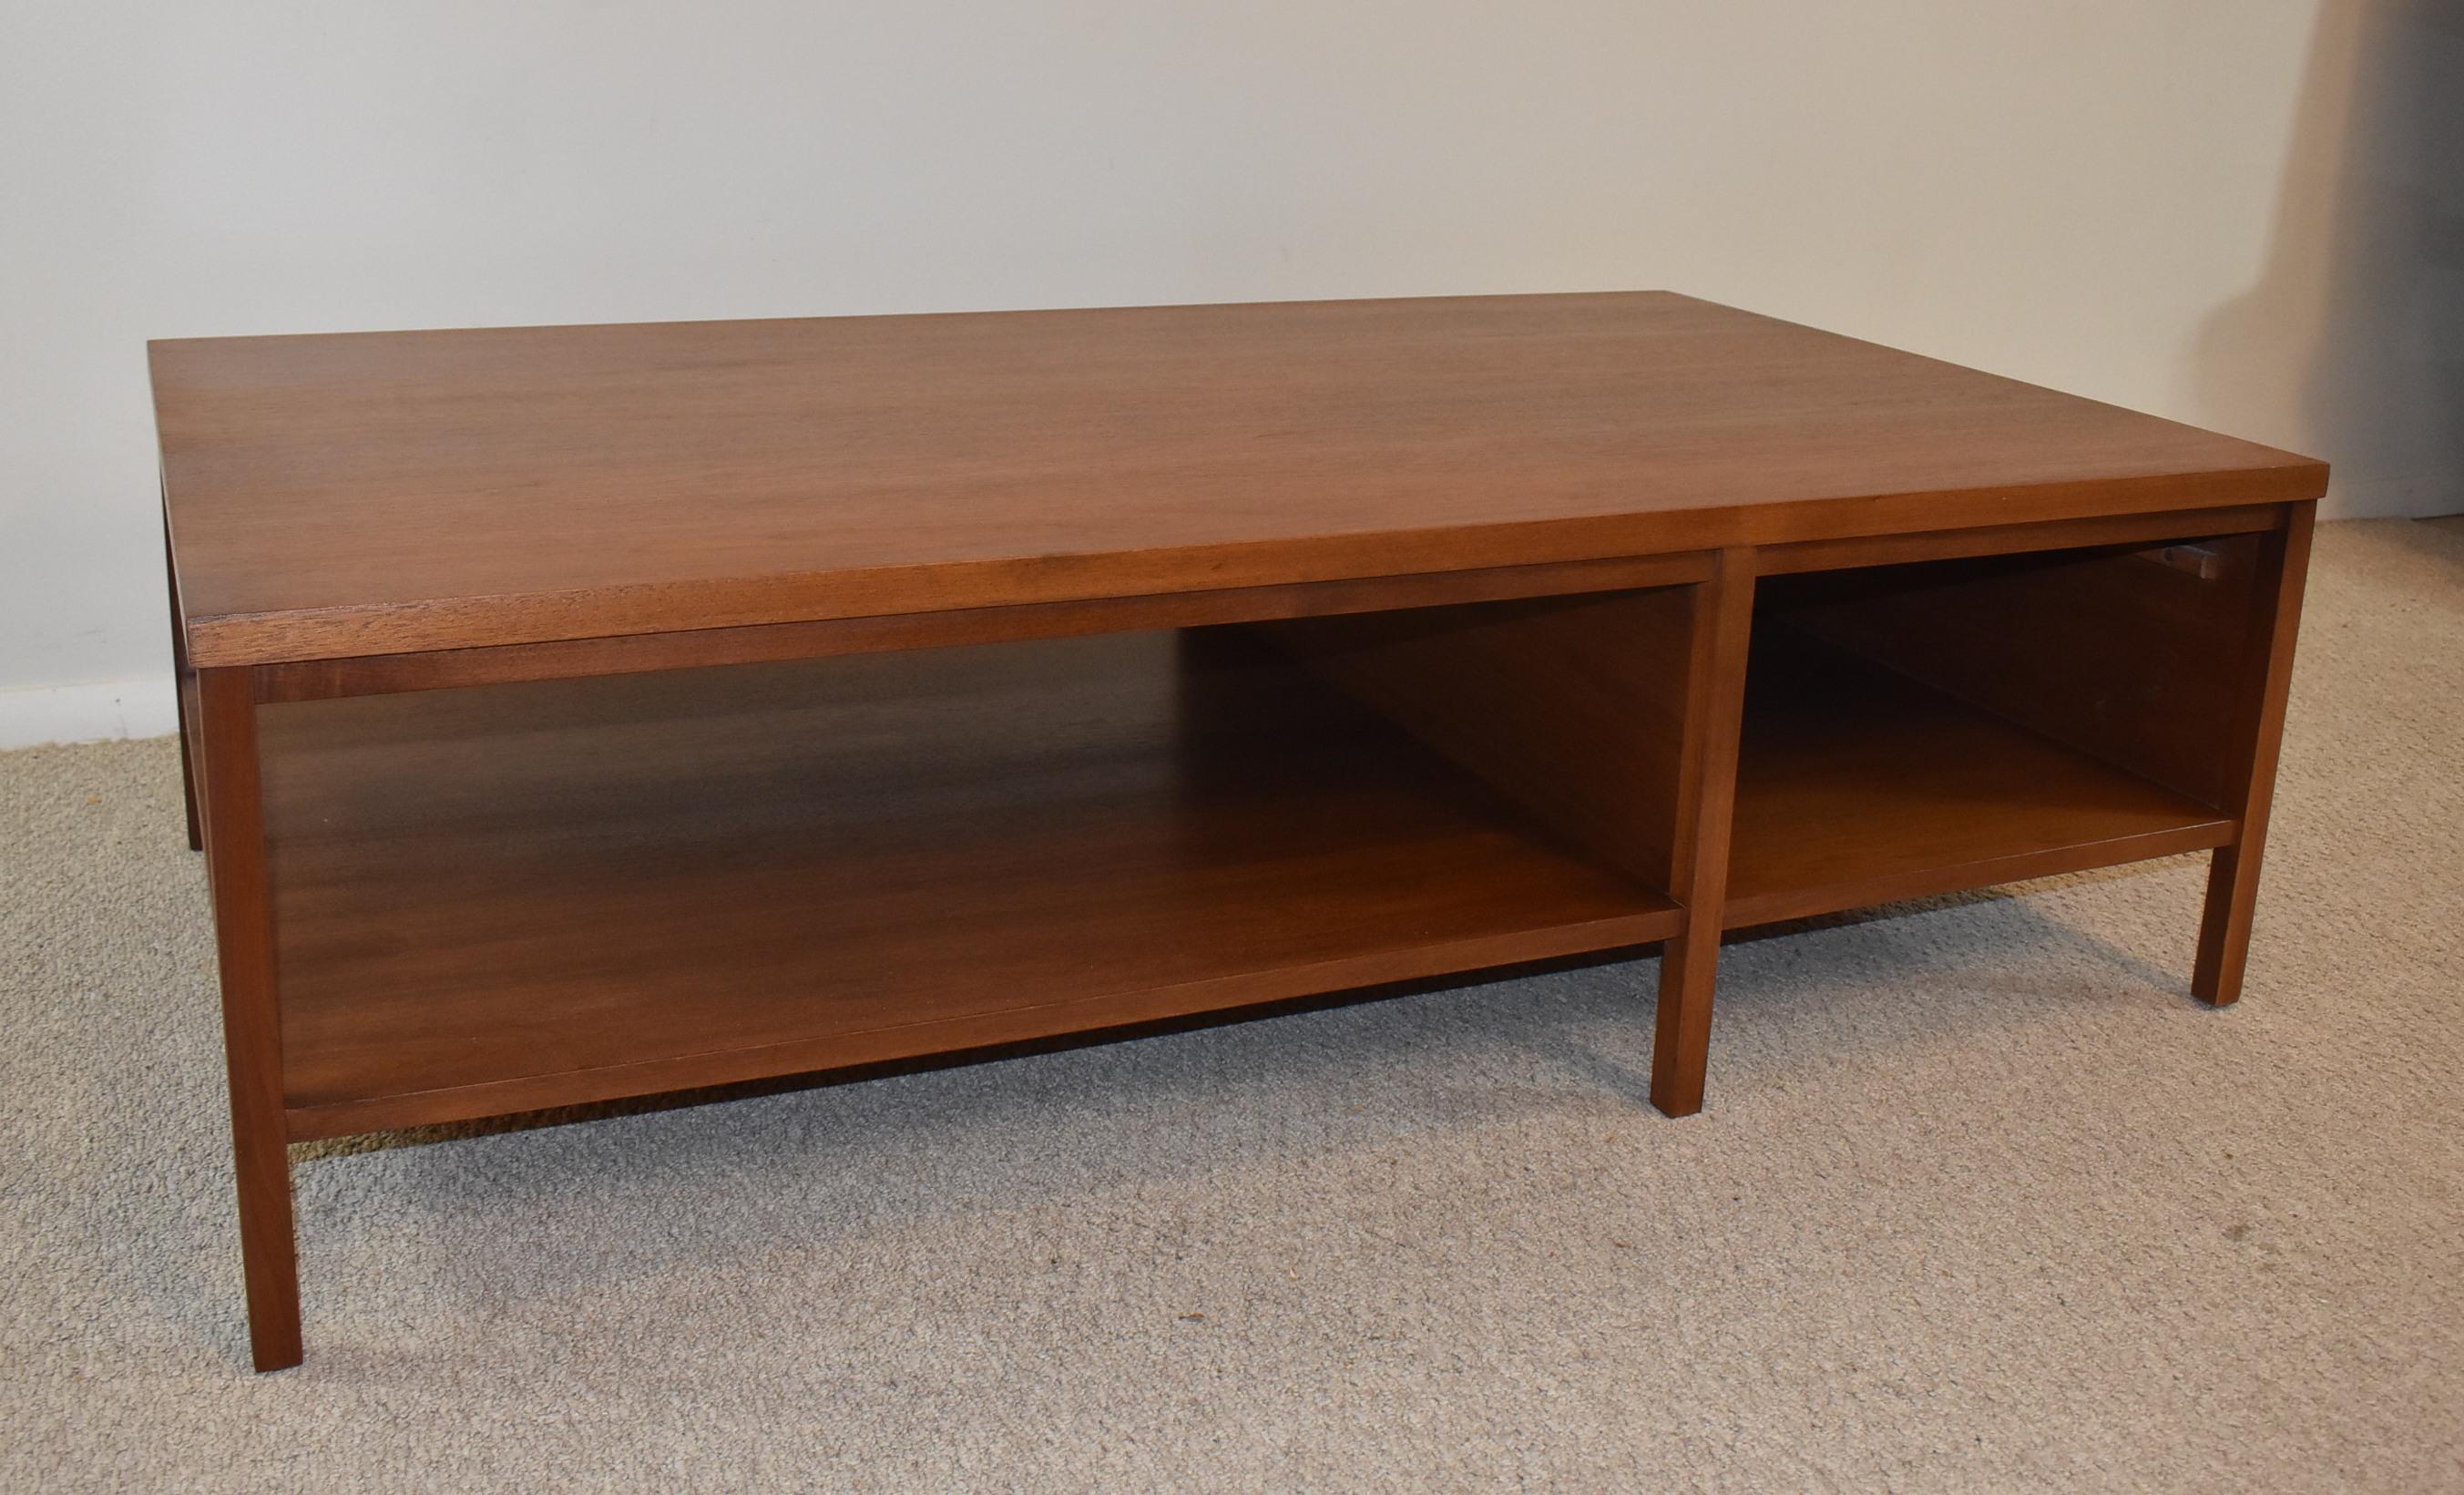 Paul McCobb Planner Group coffee table for Calvin Furniture, Co. Walnut coffee table with a single drawer and full lower storage. Excellent condition. 54